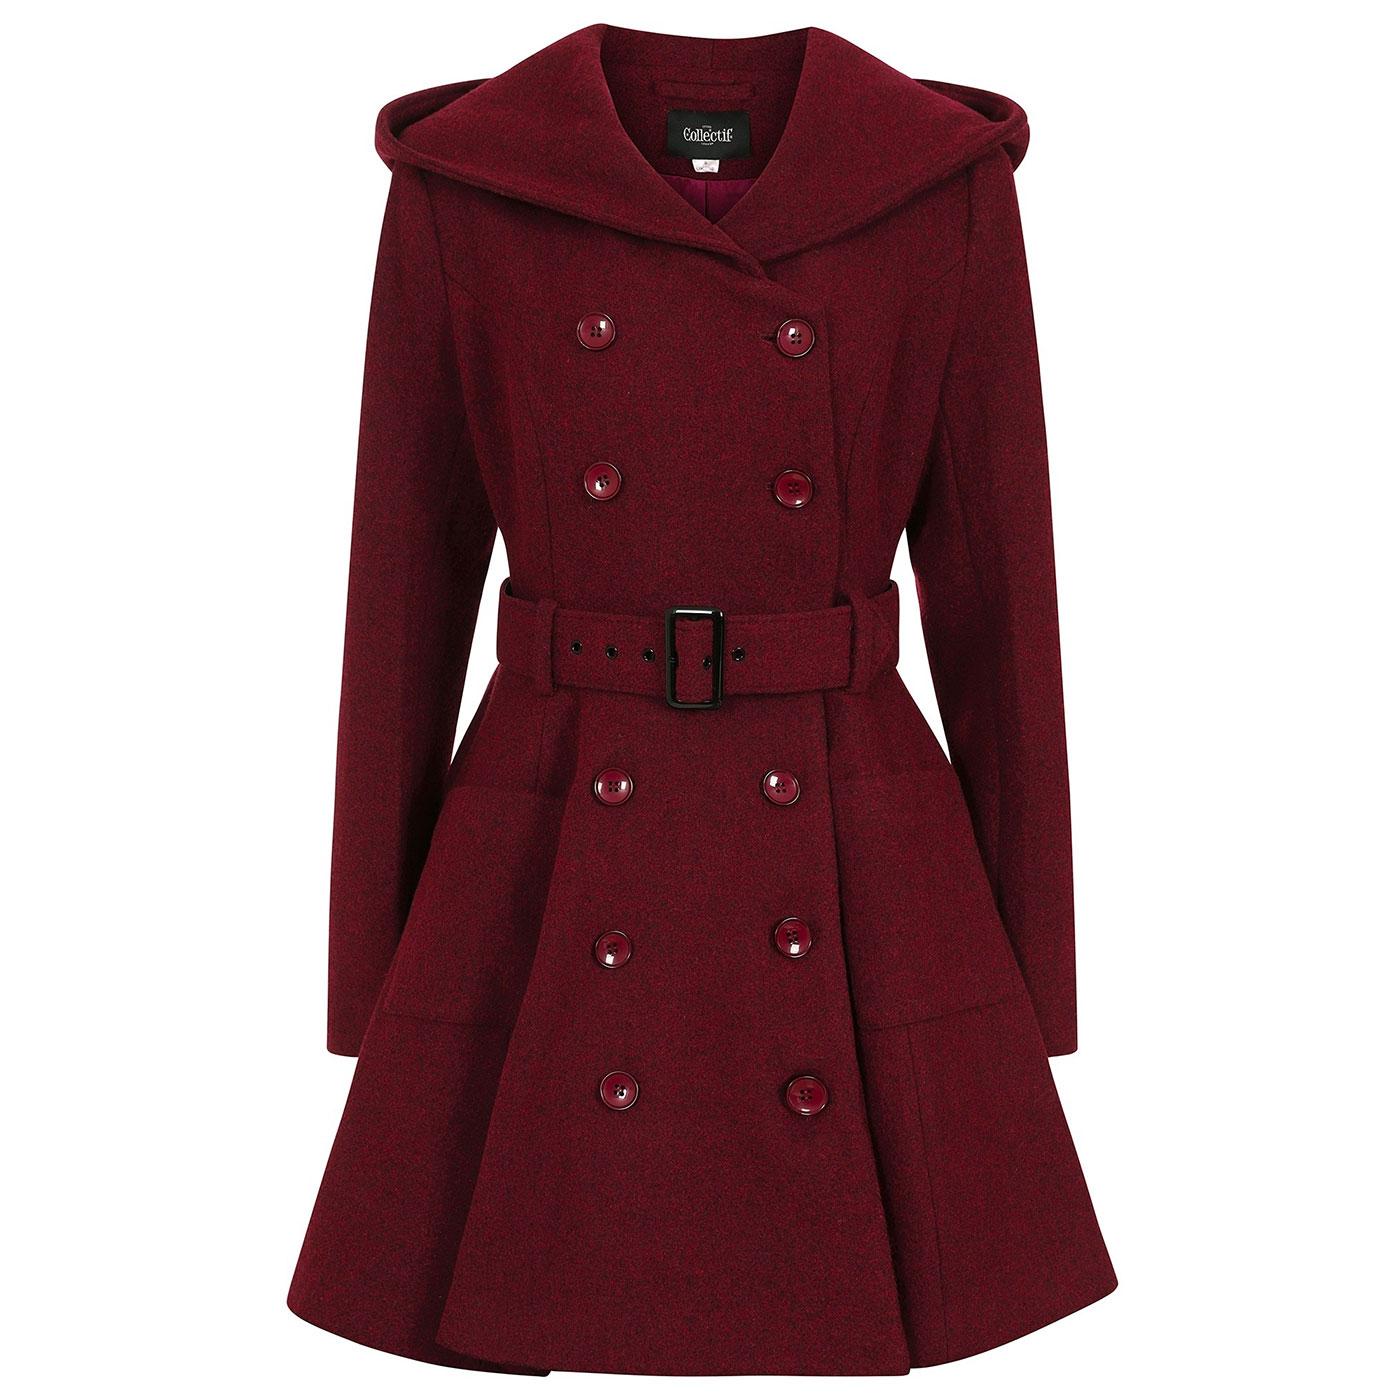 COLLECTIF Everleigh Retro 60s Hooded Skater Coat in Burgundy